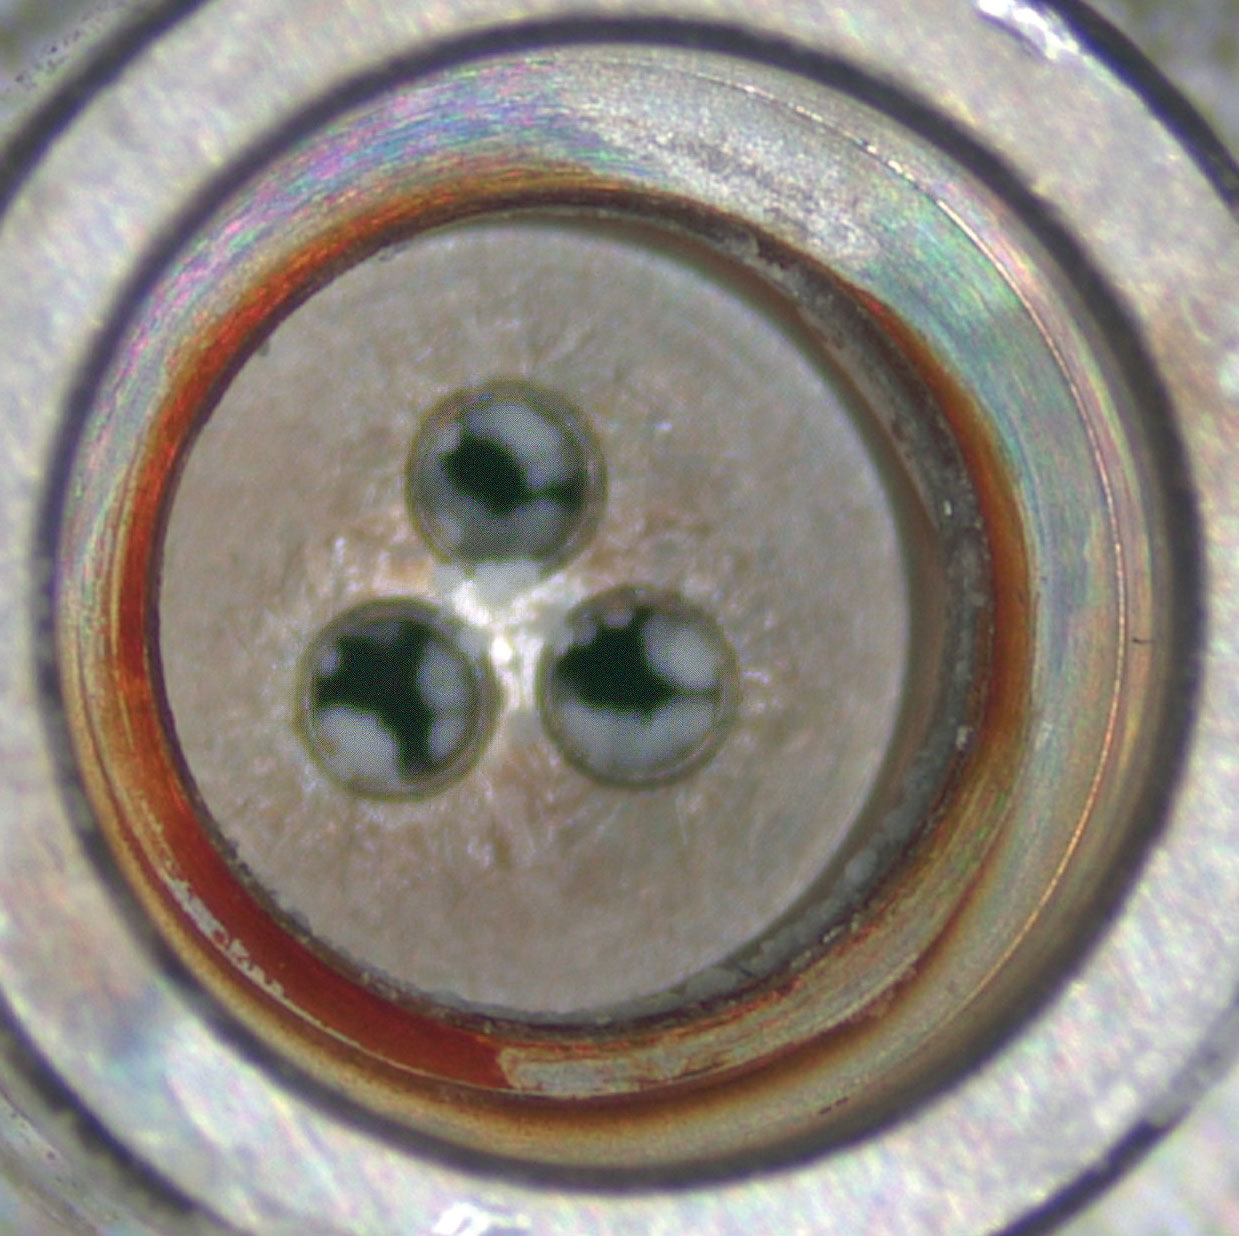 crystallization in ball cage thru holes when cartridge dries out after use of a mobile phase